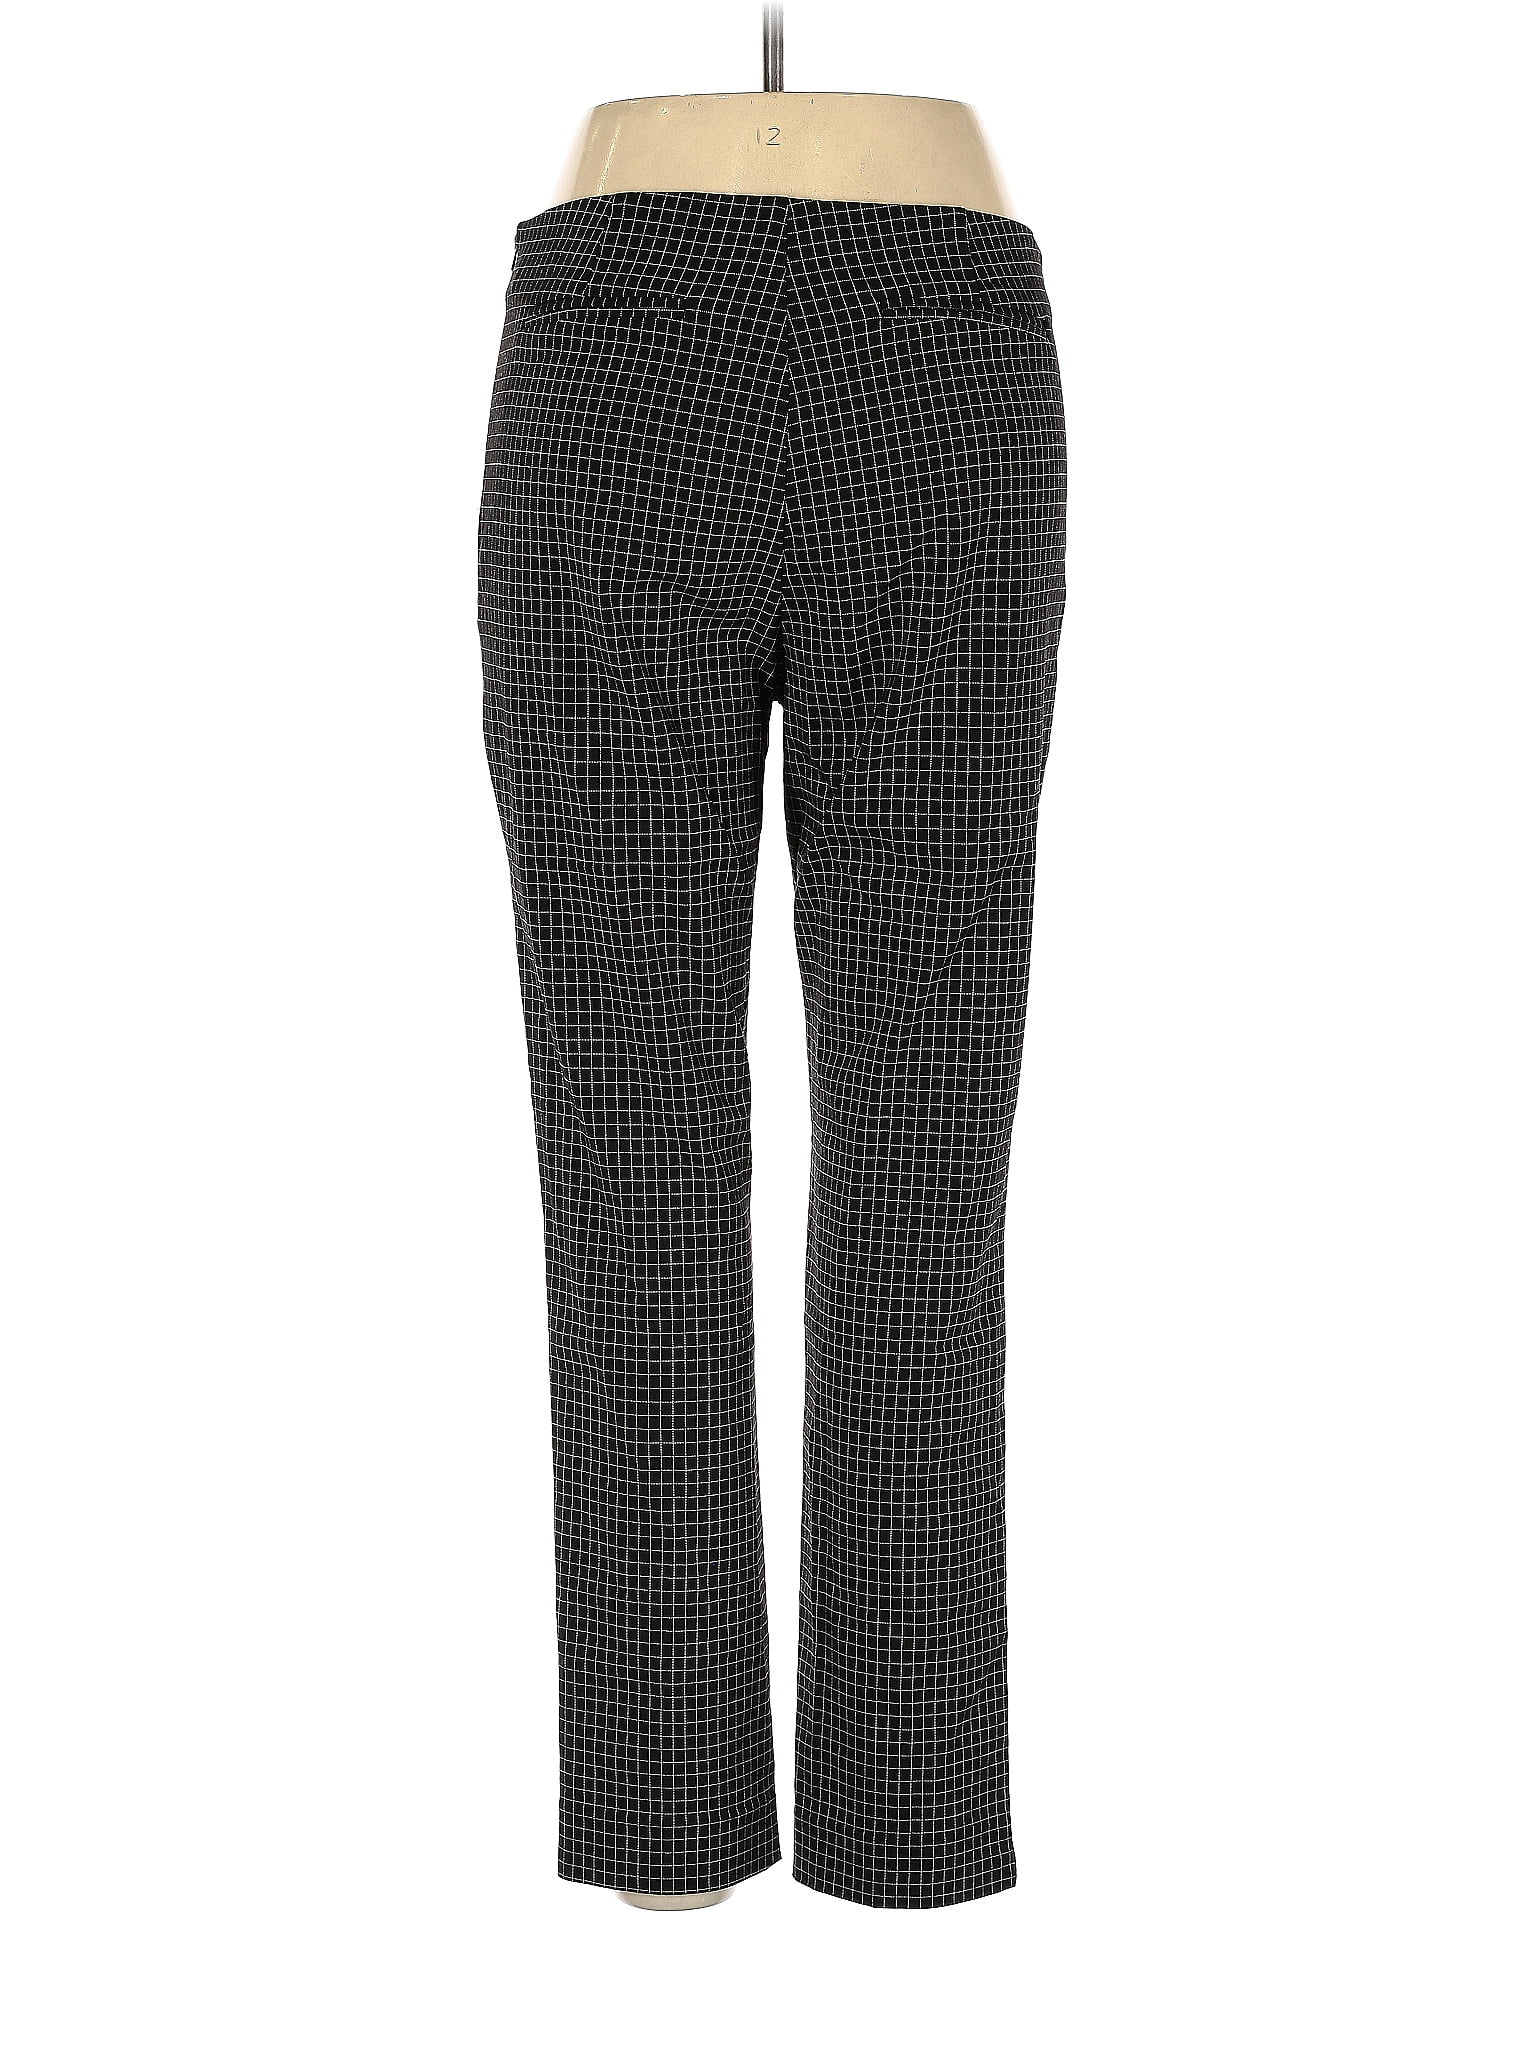 Eric Signature Women's Pants On Sale Up To 90% Off Retail